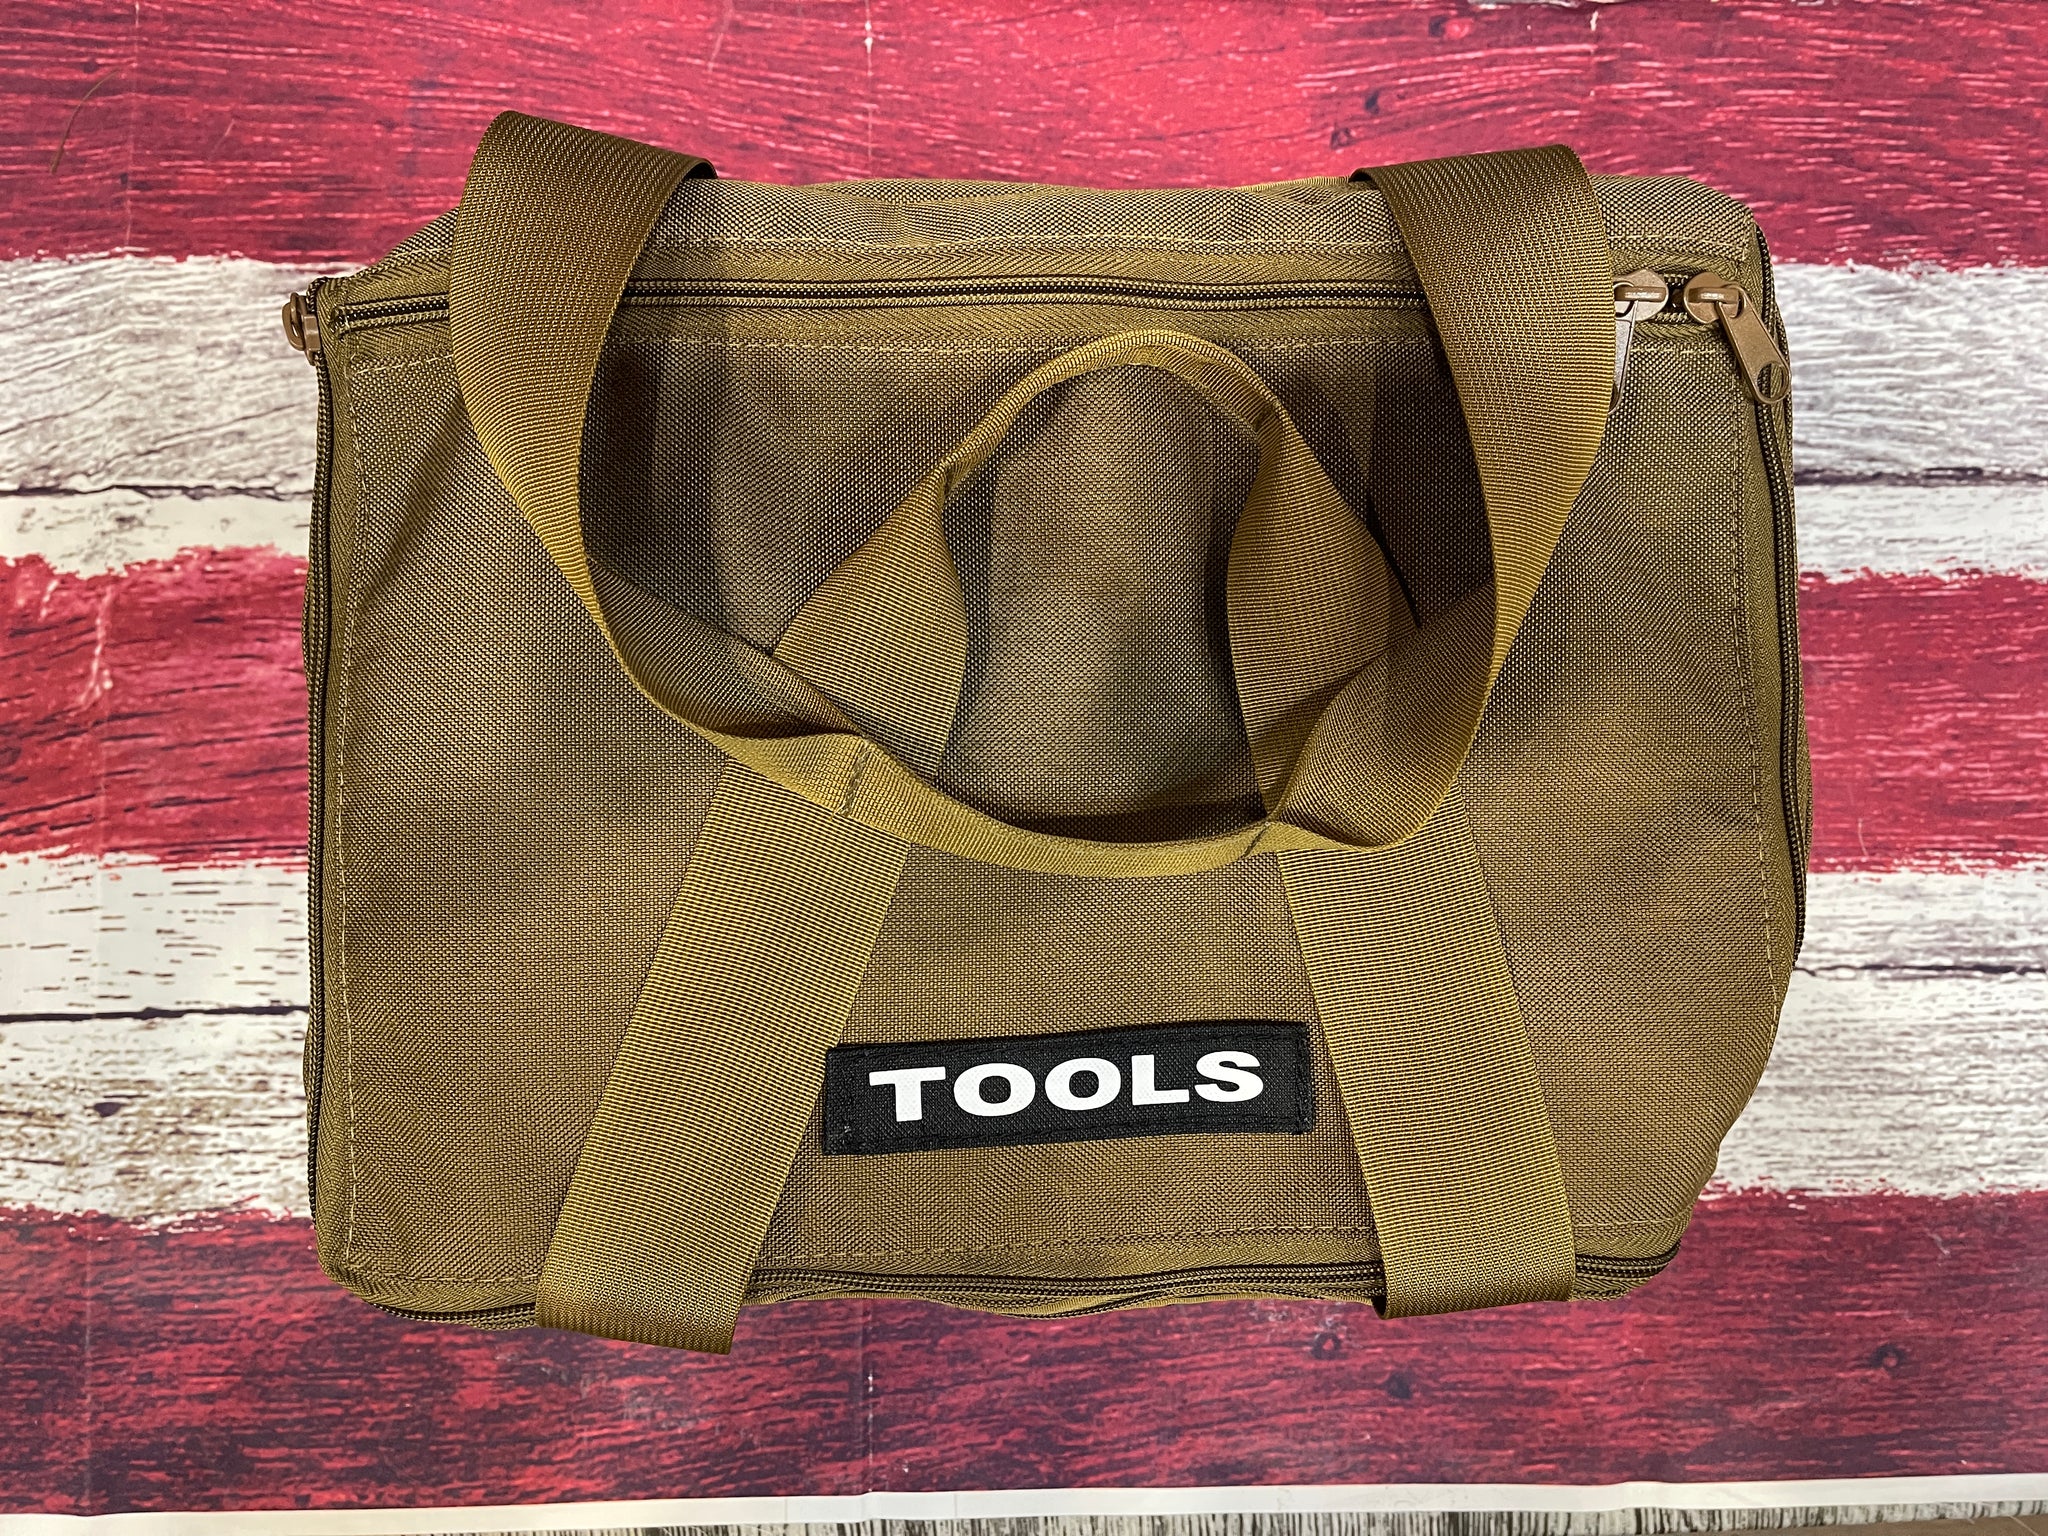 Overland Vehicle Systems 21079941 Rolled Bag General Tools with Handle and Straps - #16 Waxed Canvas